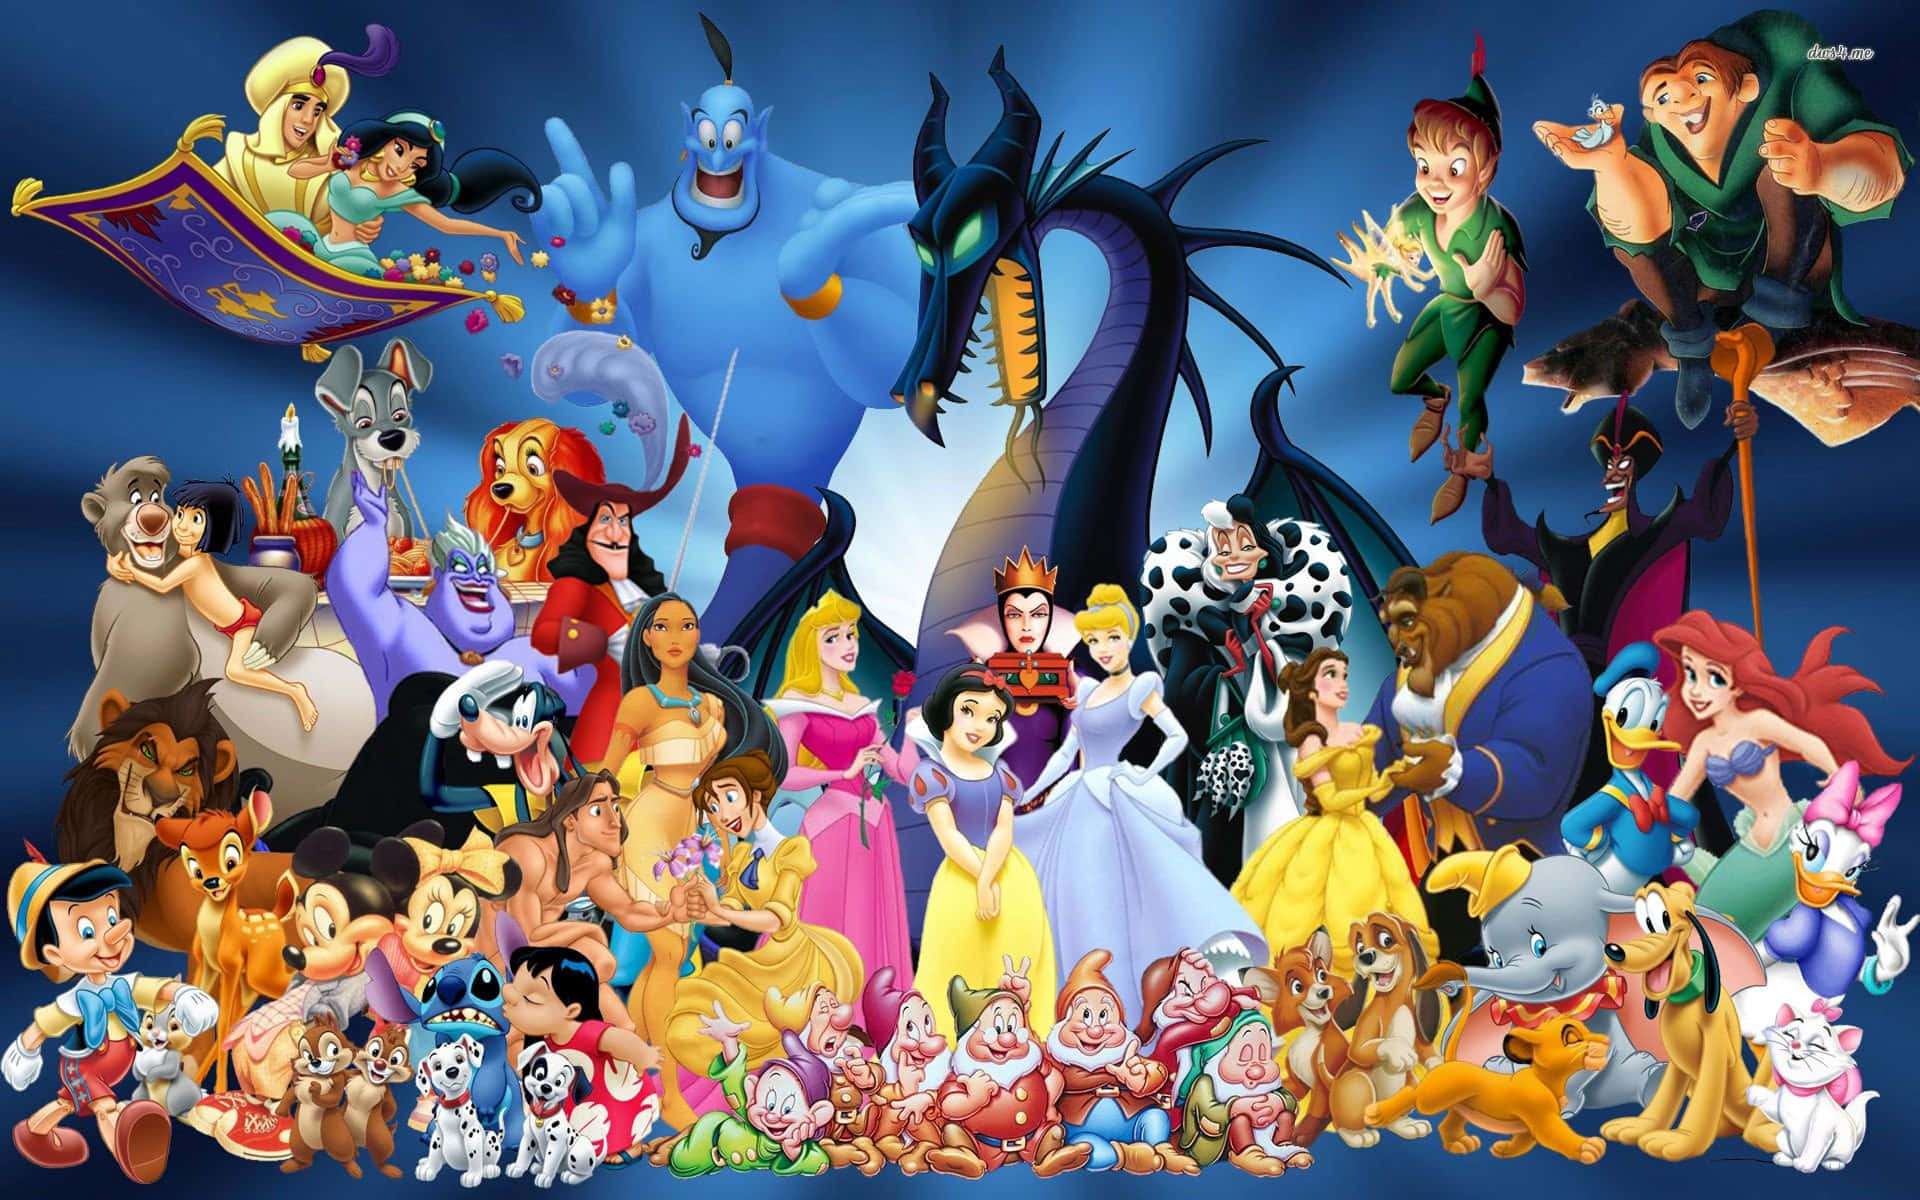 Caption: Enchanting Disney 3D Movie characters gathered together Wallpaper